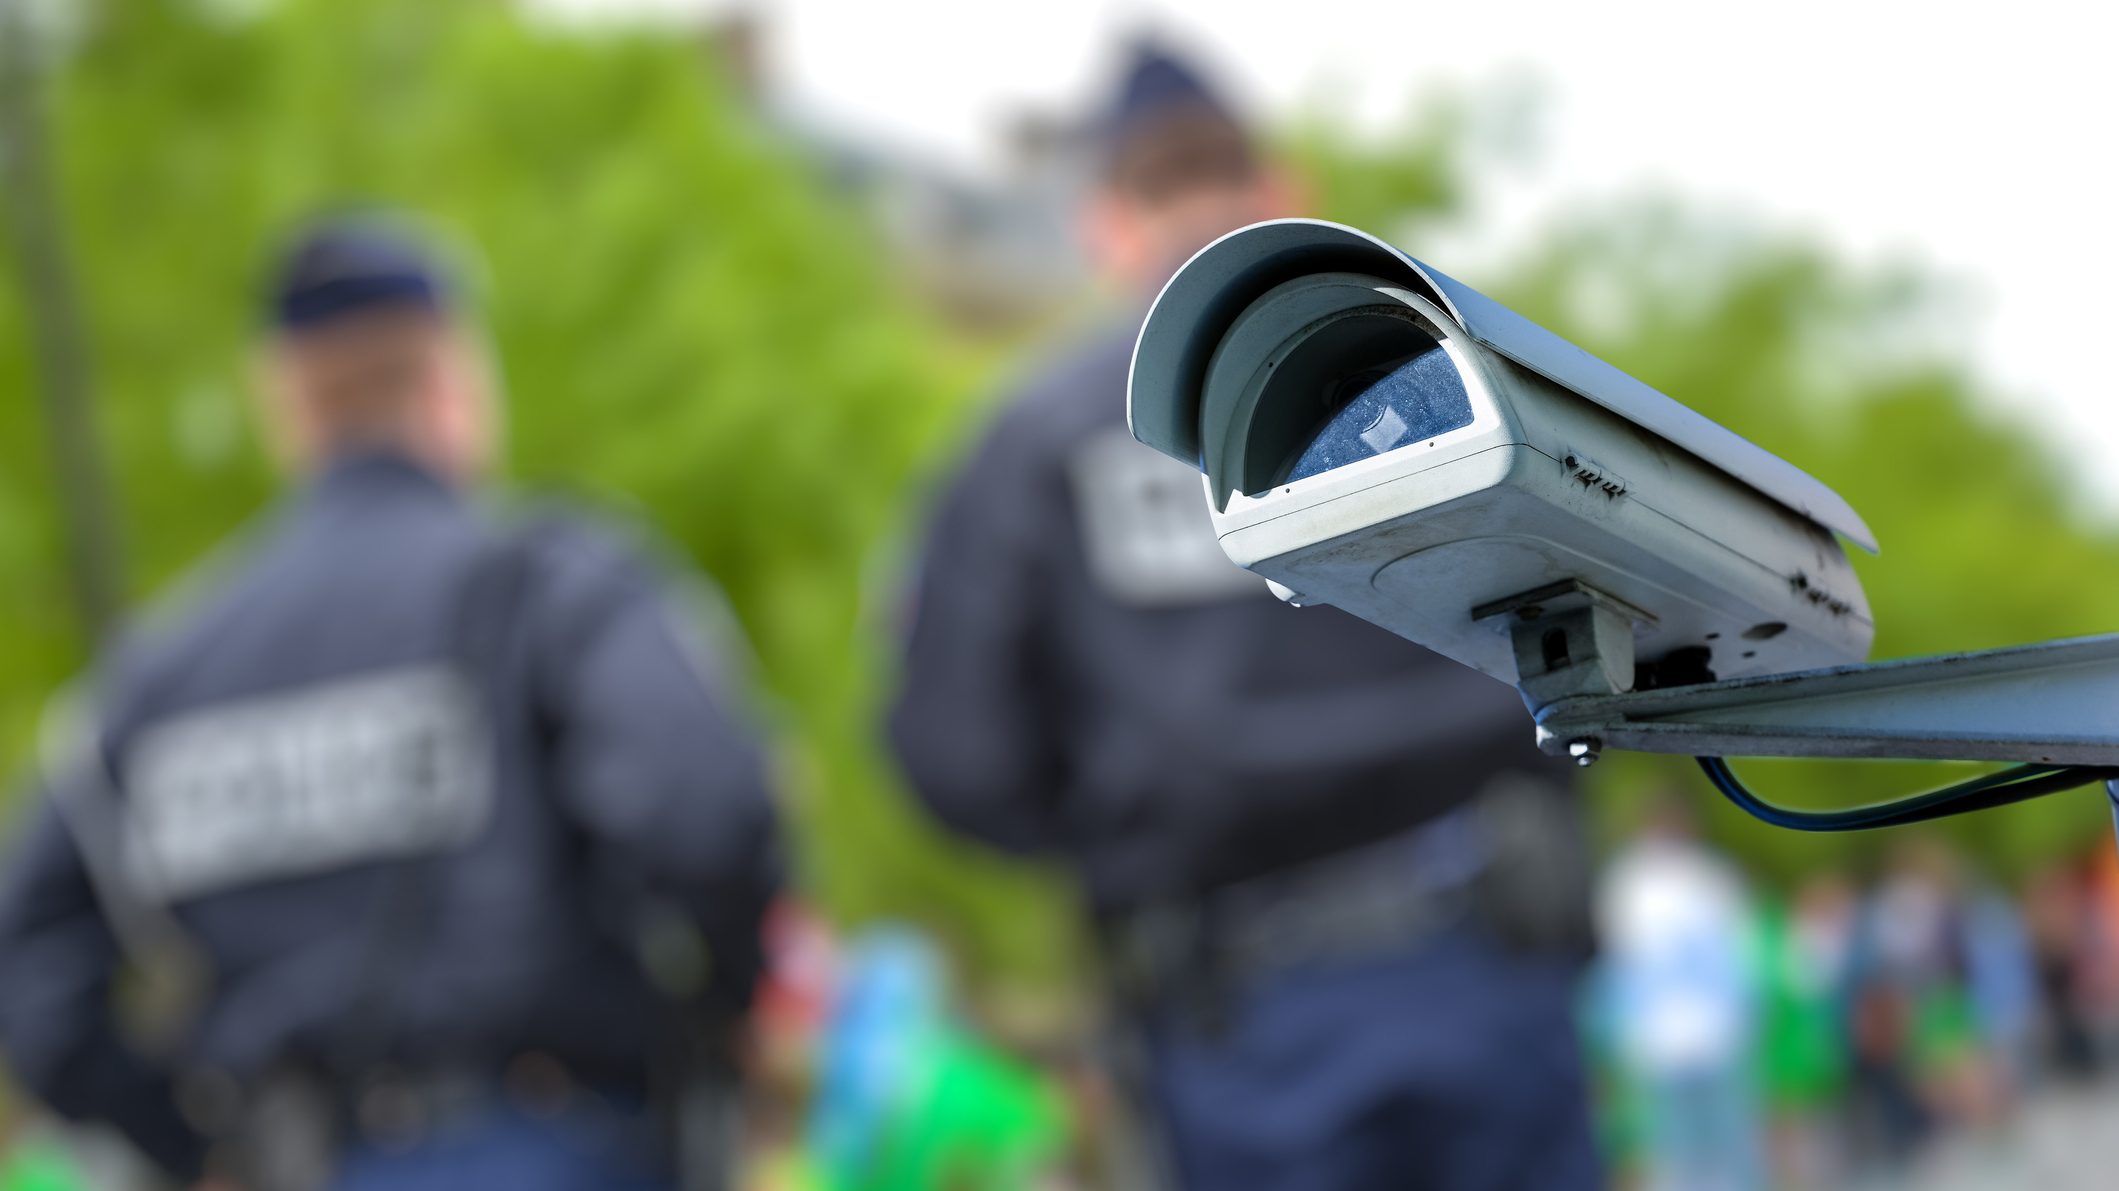 Focus on security CCTV camera or surveillance system with police officers on blurry background